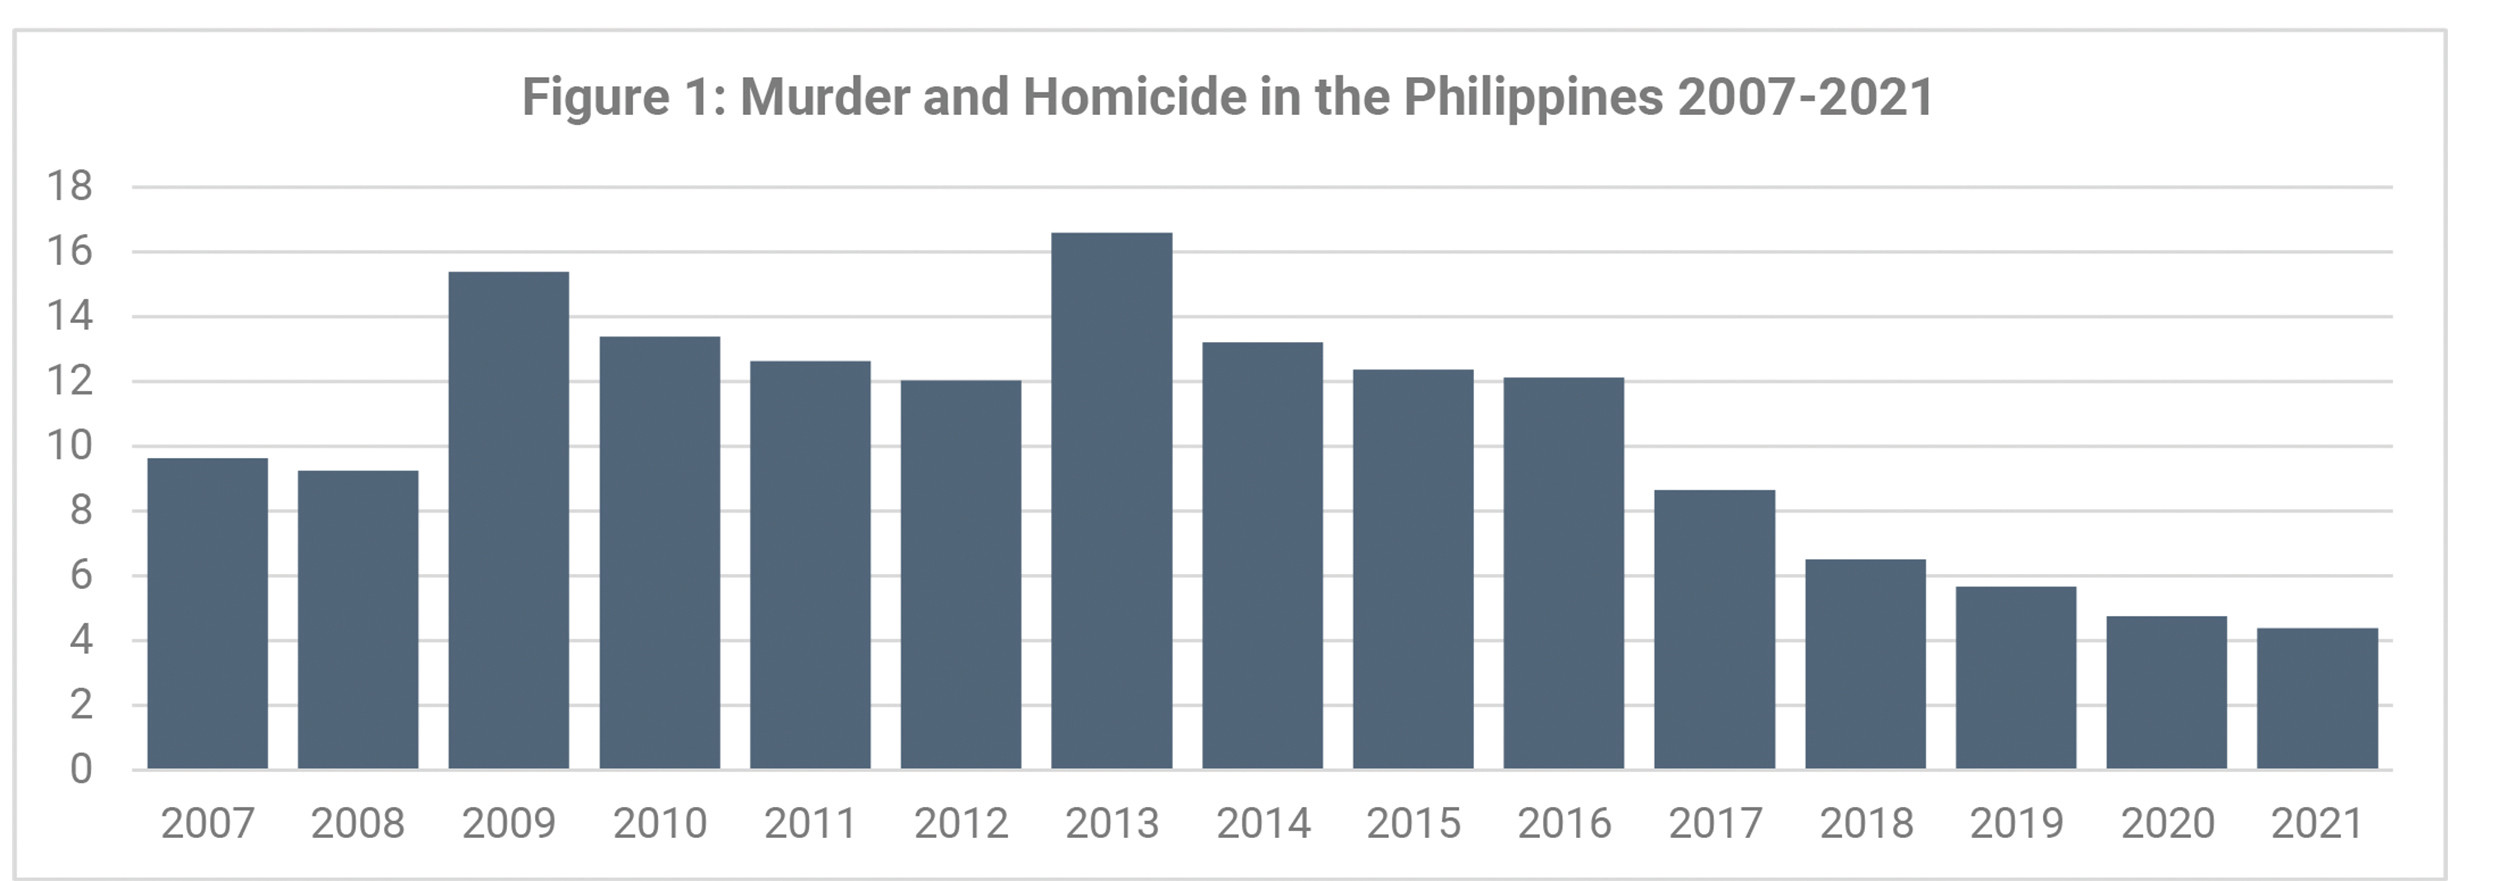 This graph shows the murder and homicide numbers in the Philippines from 2007–2021